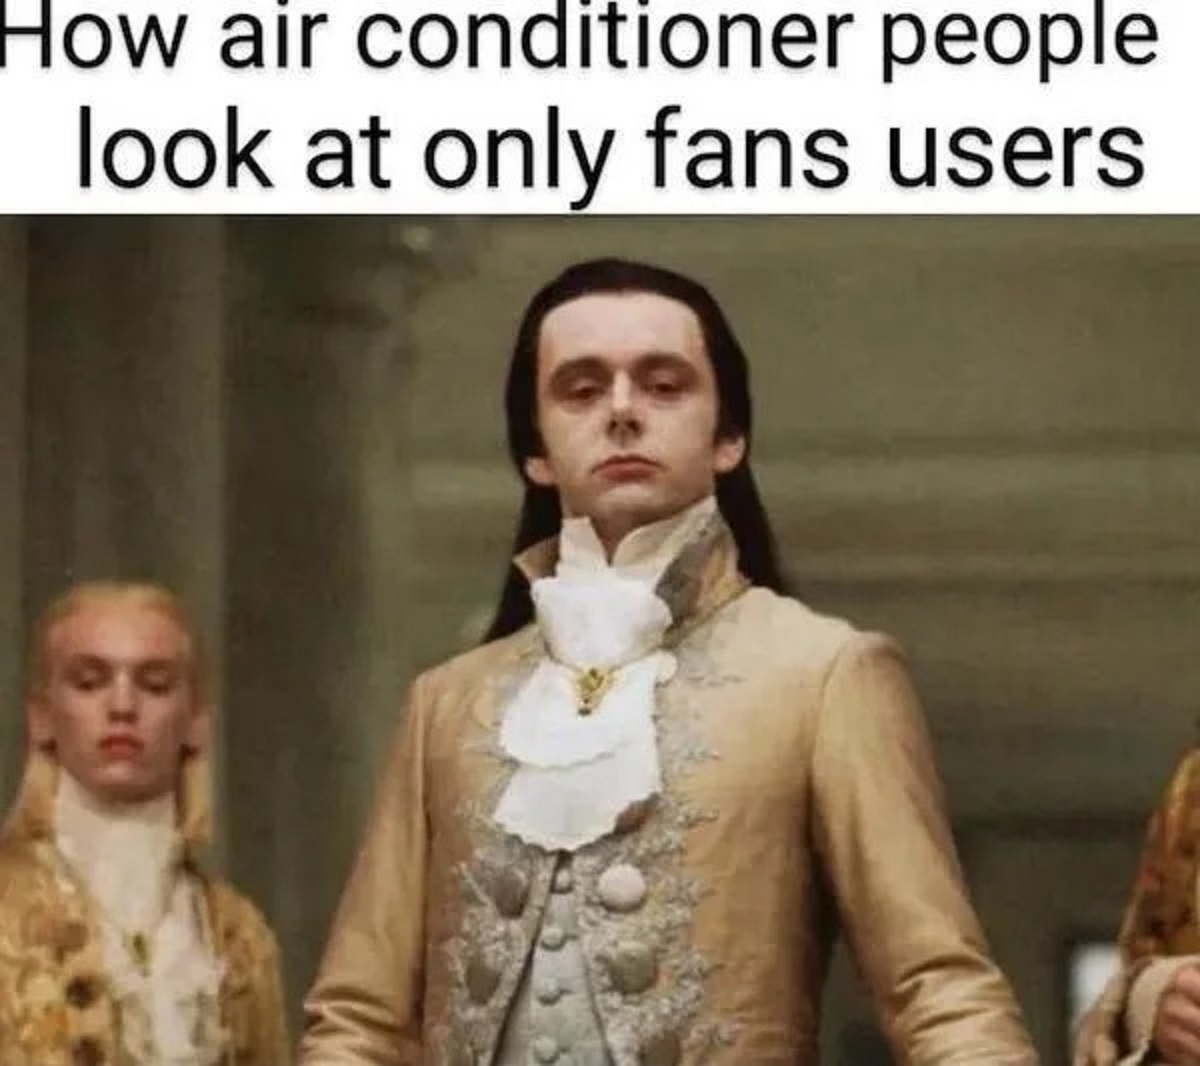 photo caption - How air conditioner people look at only fans users